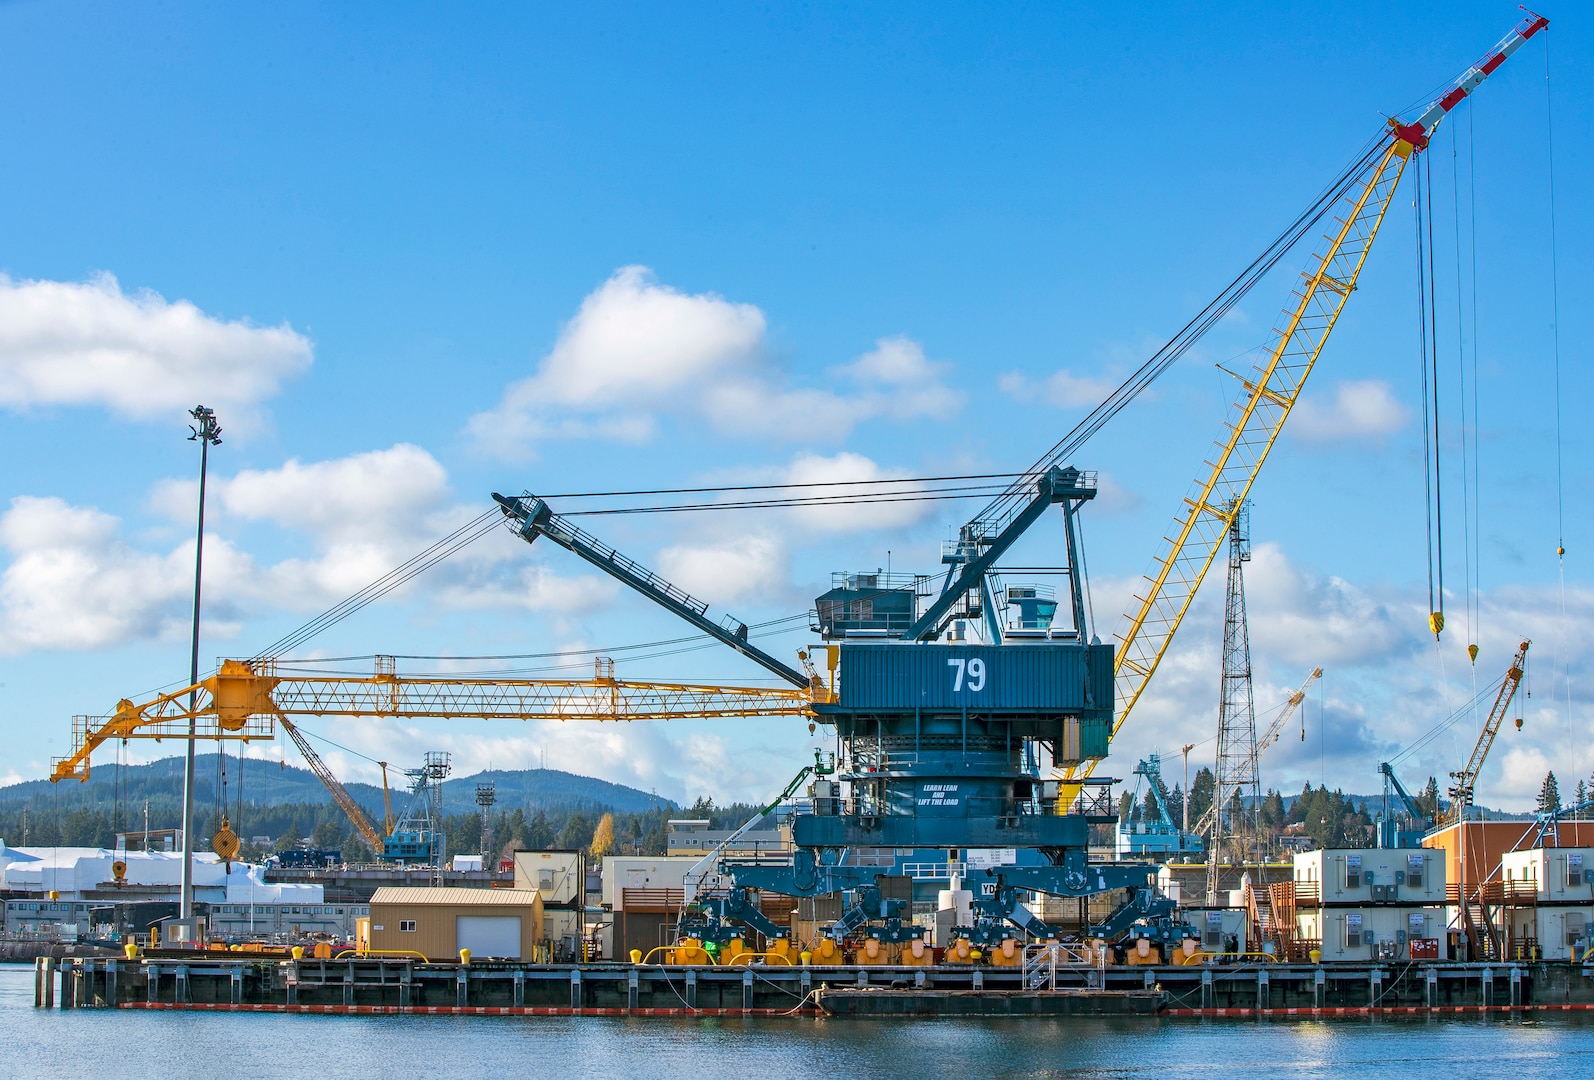 Crane 79 sits ready to be loaded onto a barge for shipment from Puget Sound Naval Shipyard & Intermediate Maintenance Facility to Portsmouth Naval Shipyard in Kittery, Maine, Nov. 16, 2021. (U.S. Navy photo by Wendy Hallmark)